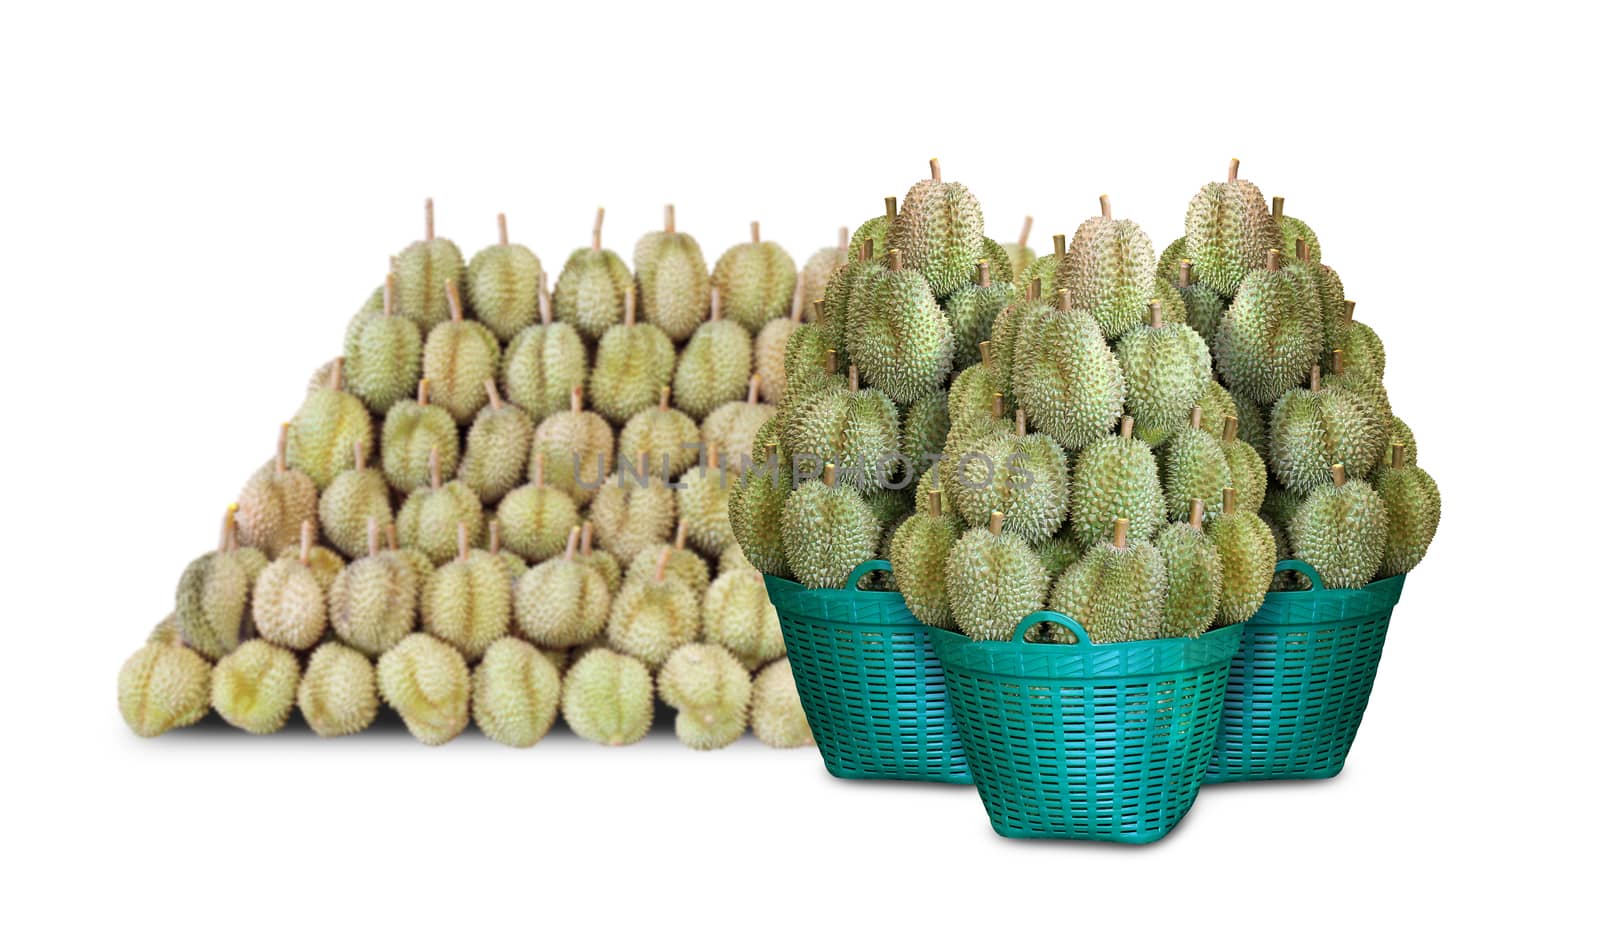 Pile of Durian, Durian fruit in a green basket for sale, Durian is king of fruits southeast Thailand, Durian many on white background by cgdeaw